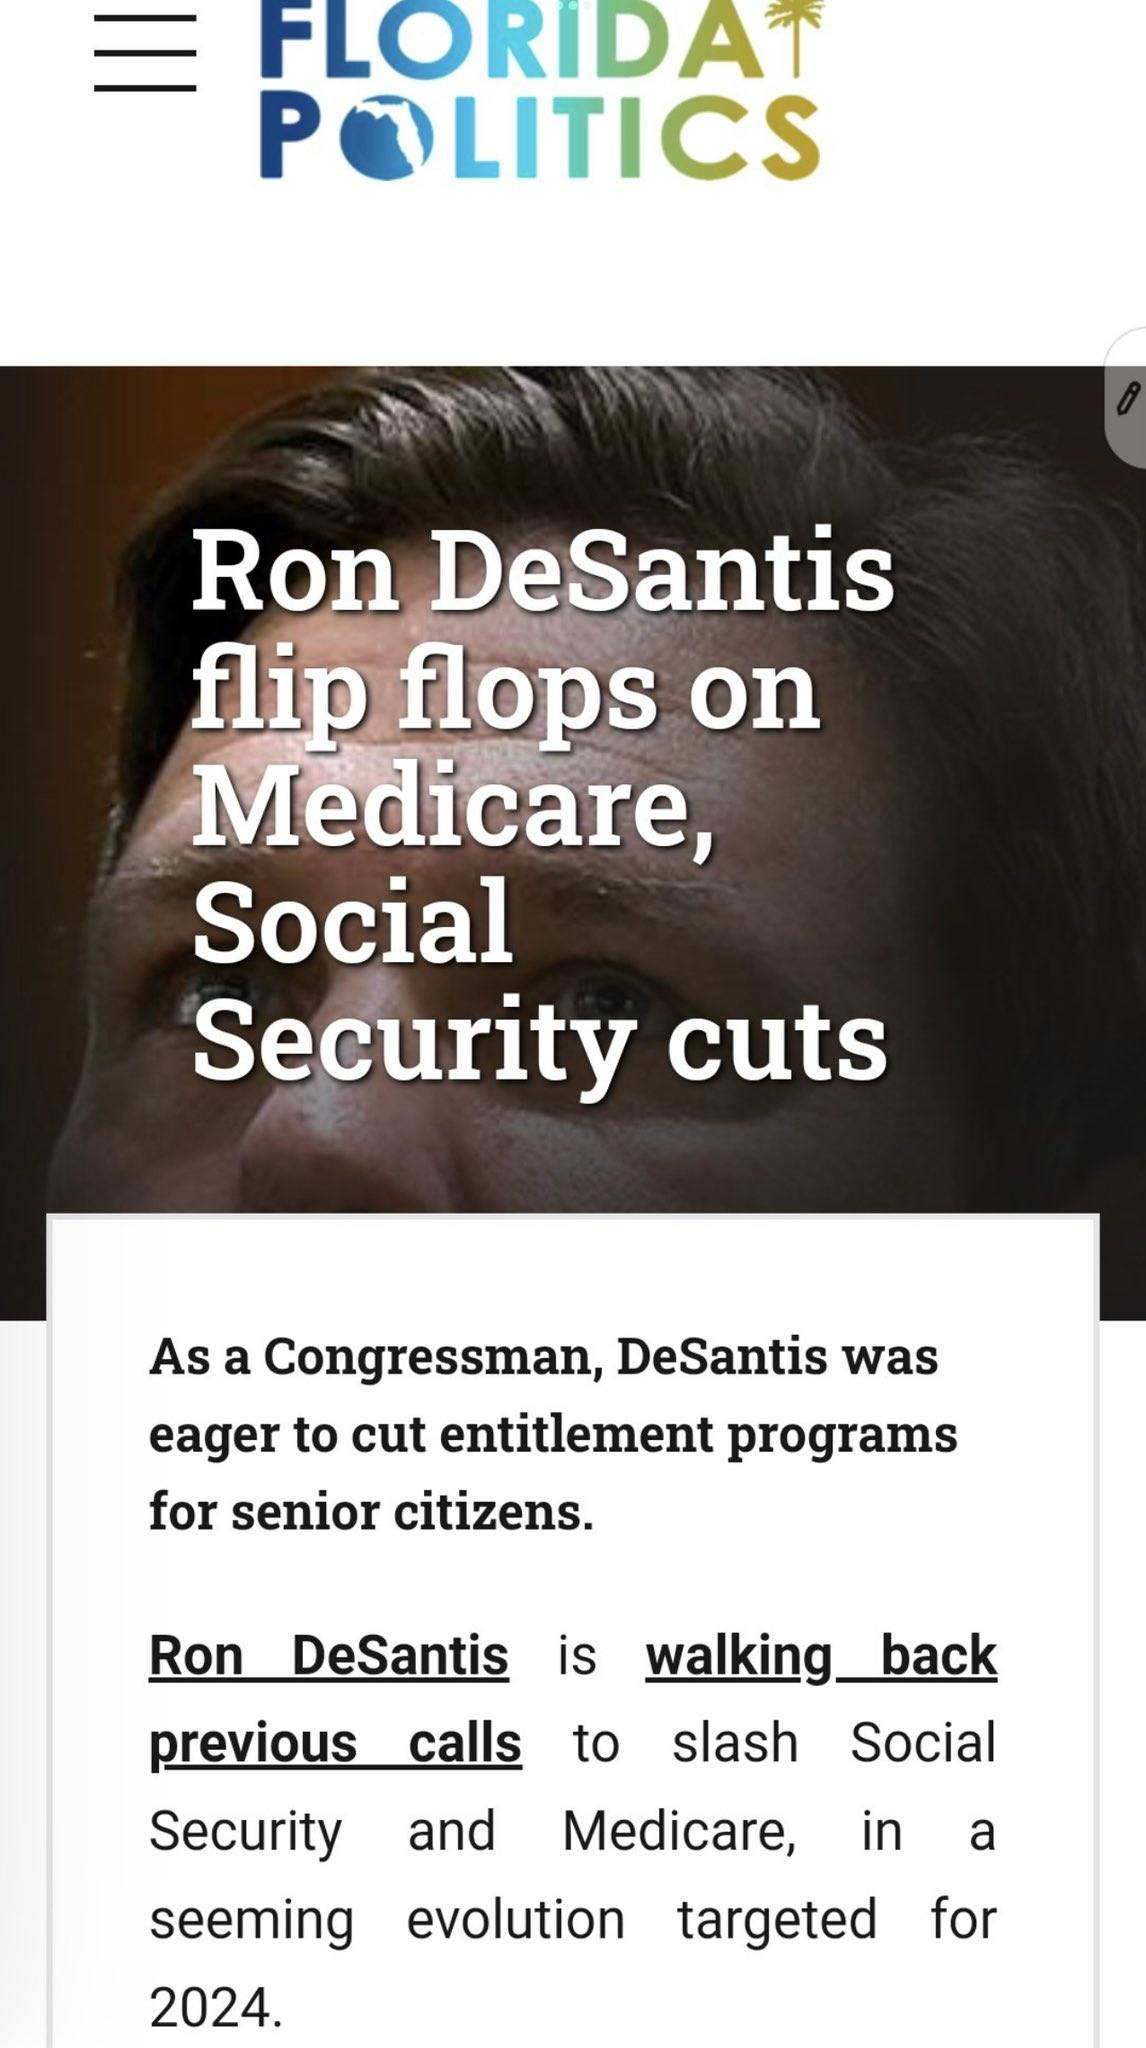 May be an image of 1 person and text that says 'FLORIDA POLITICS Ron DeSantis flip flops on Medicare, Social Security cuts As a Congressman, DeSantis was eager to cut entitlement programs for senior citizens. Ron DeSantis is calls walking_back to slash Social and previous Security seeming 2024. Medicare in a evolution targeted for'